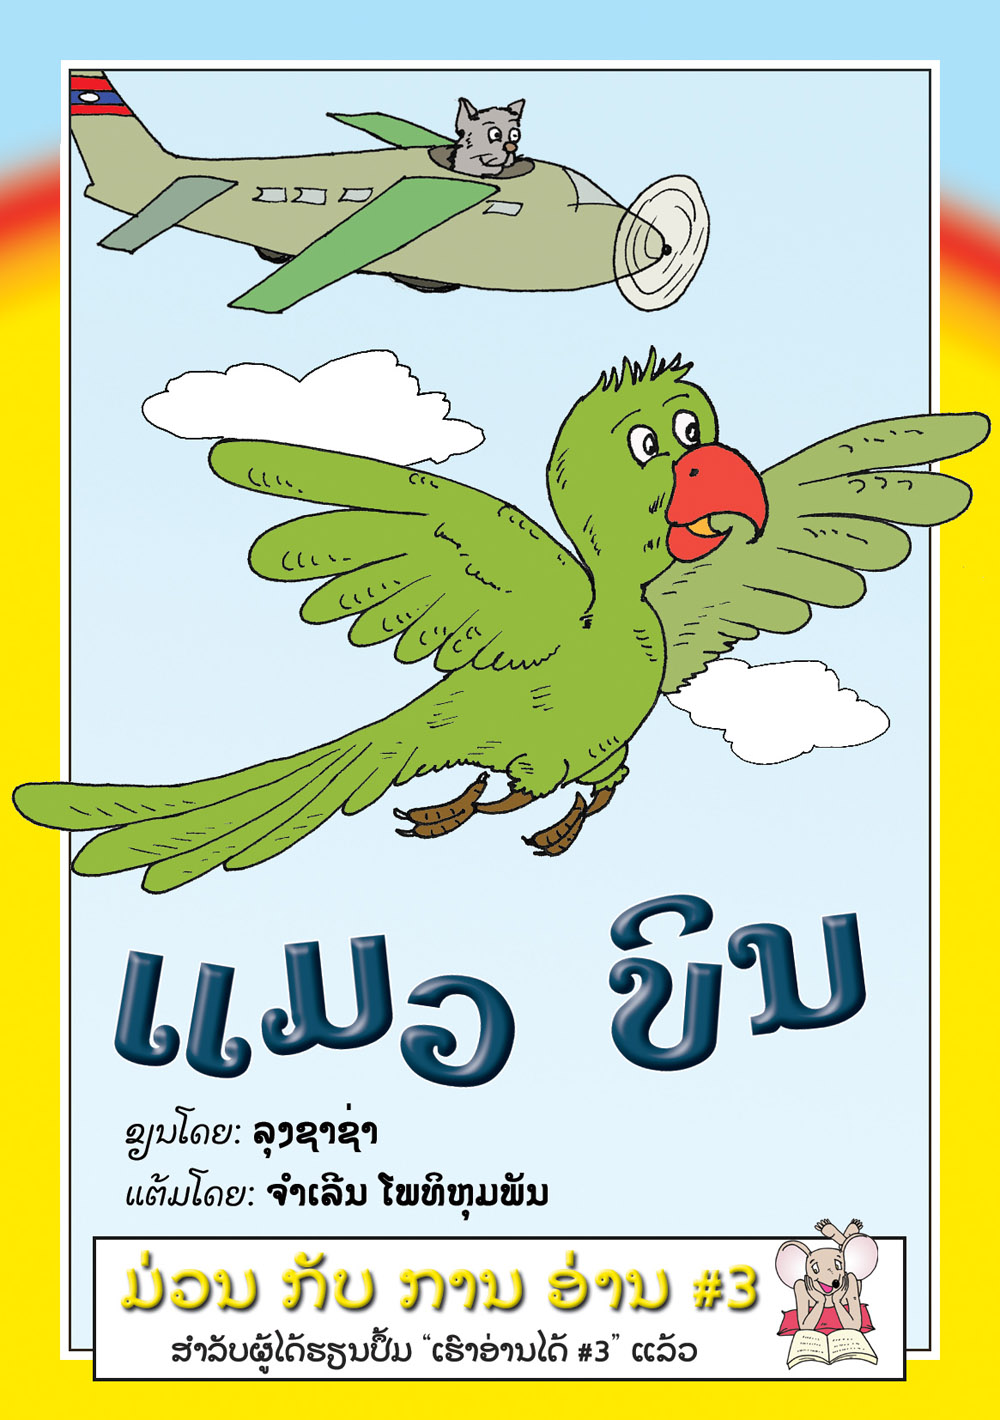 The Cat That Flew large book cover, published in Lao language